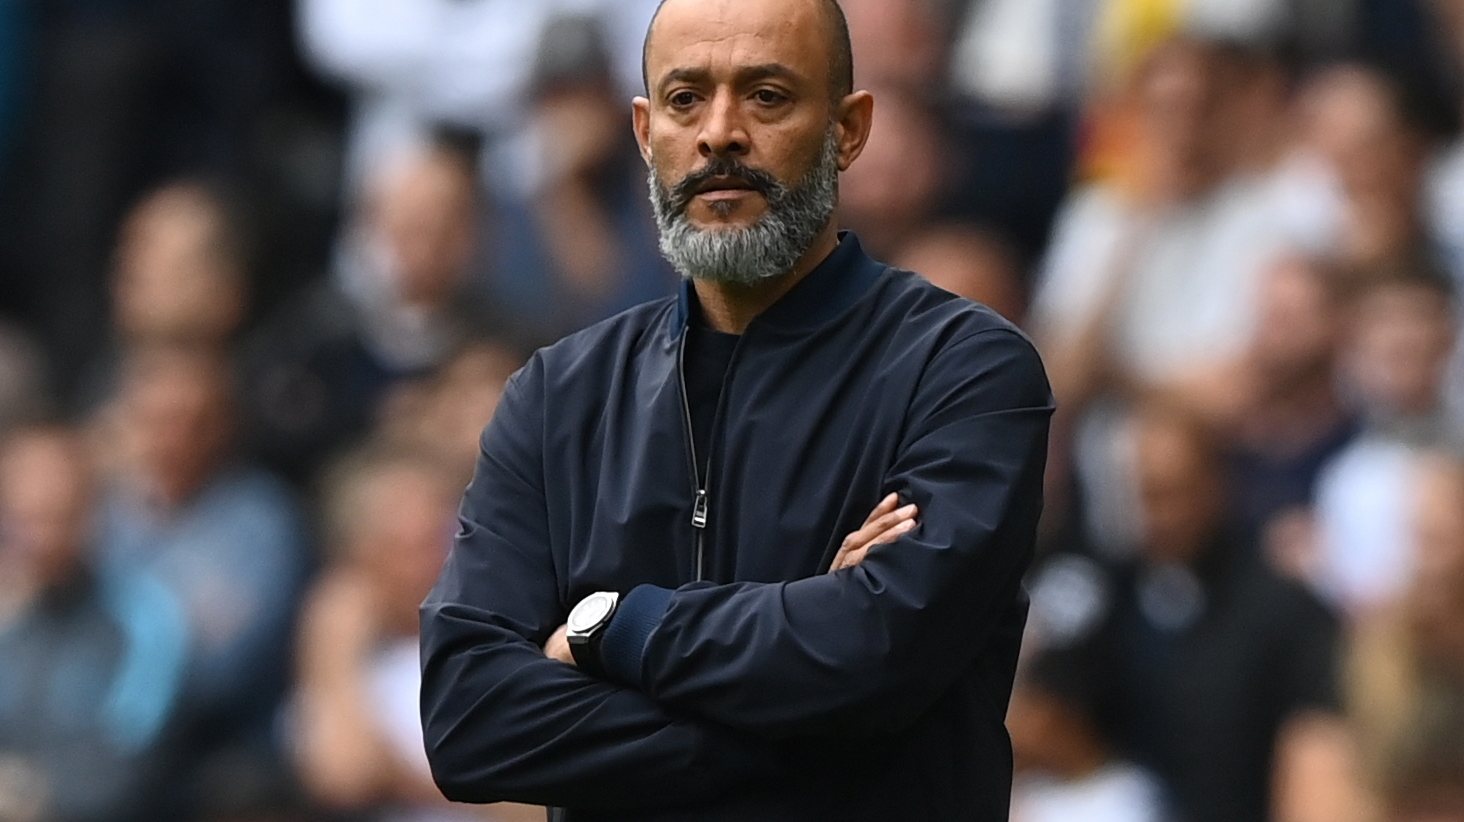 epa09557227 (FILE) - Tottenham manager Nuno Espirito Santo during the English Premier League match between Tottenham Hotspur and Watford in London, Britain, 29 August 2021 (reissued 01 November 2021). Tottenham Hotspur have sacked manager Nuno Espirito Sant, the club said in a statement on 01 November 2021.  EPA/FACUNDO ARRIZABALAGA EDITORIAL USE ONLY. No use with unauthorized audio, video, data, fixture lists, club/league logos or &#039;live&#039; services. Online in-match use limited to 120 images, no video emulation. No use in betting, games or single club/league/player publications. *** Local Caption *** 57139262